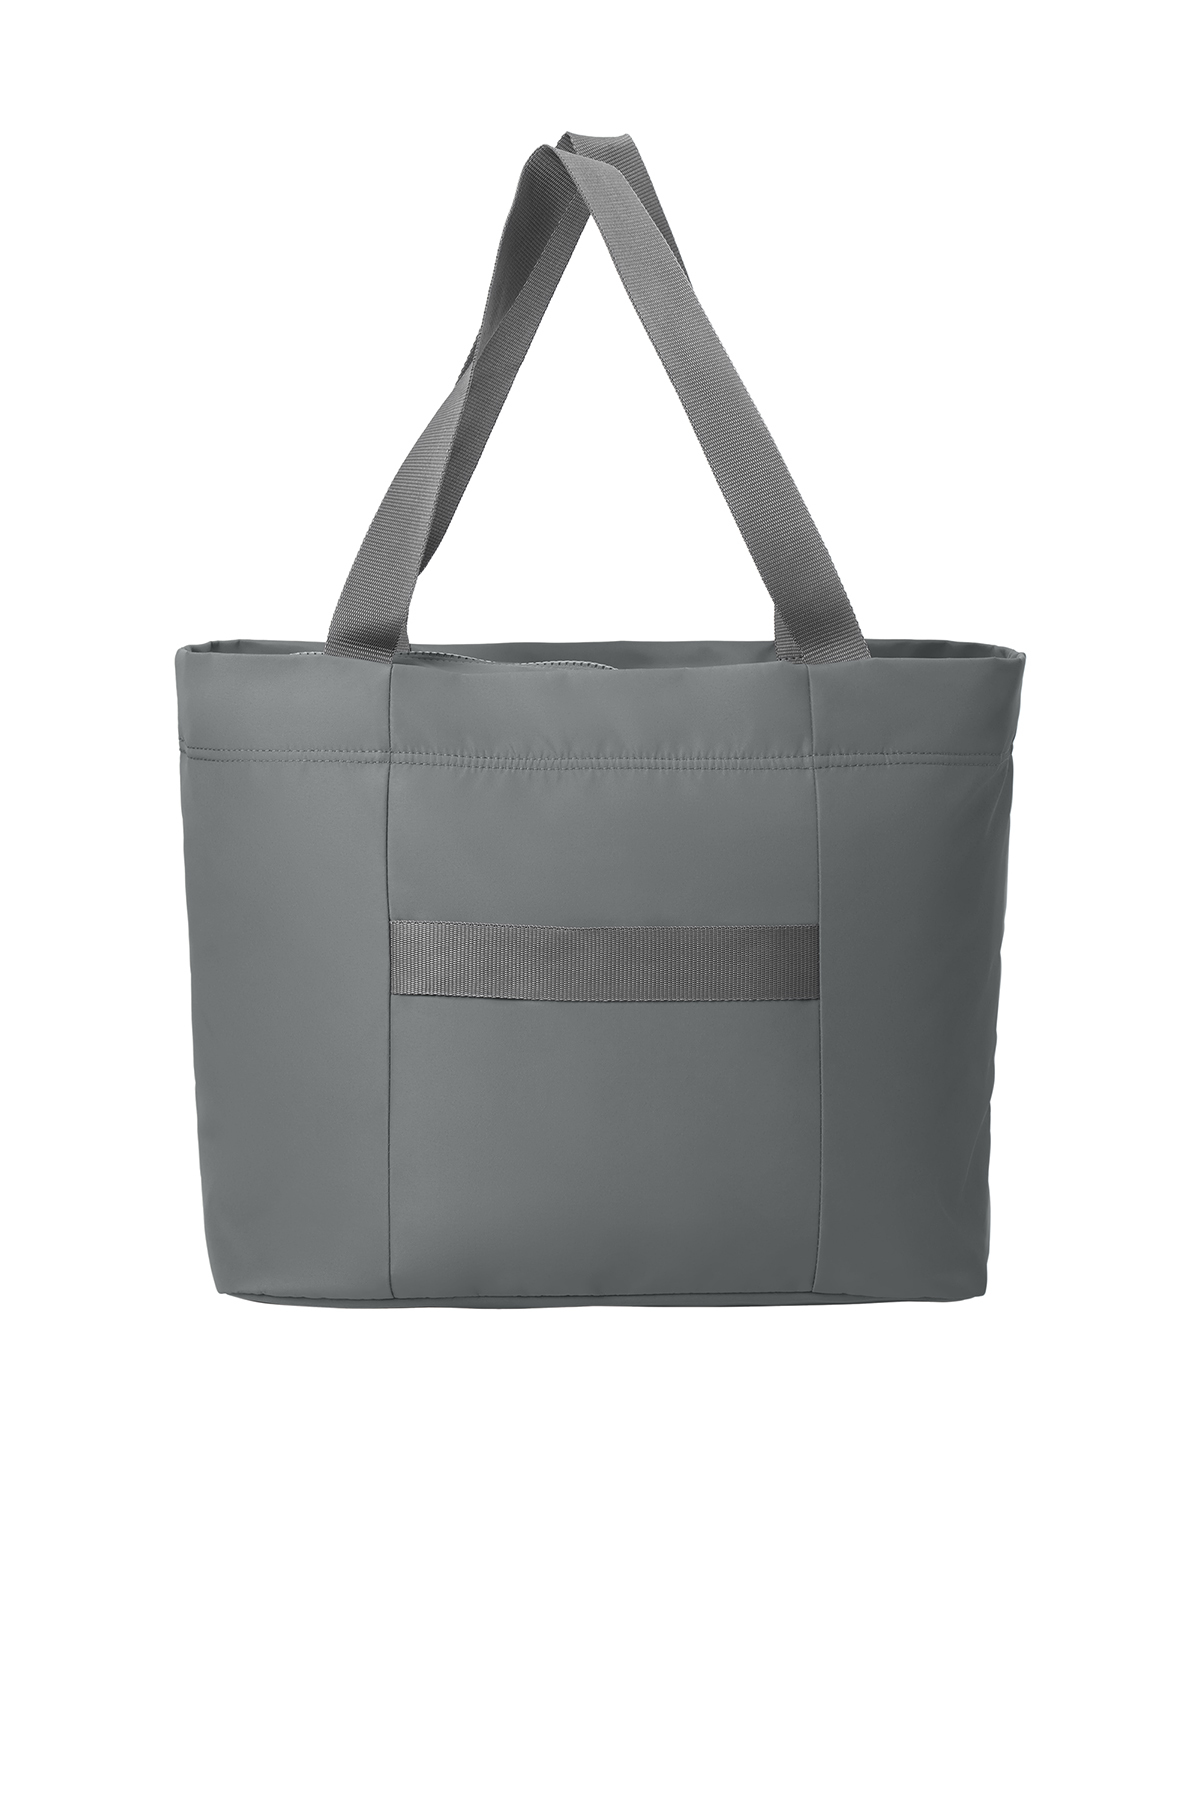 Port Authority Matte Carryall Tote | Product | SanMar